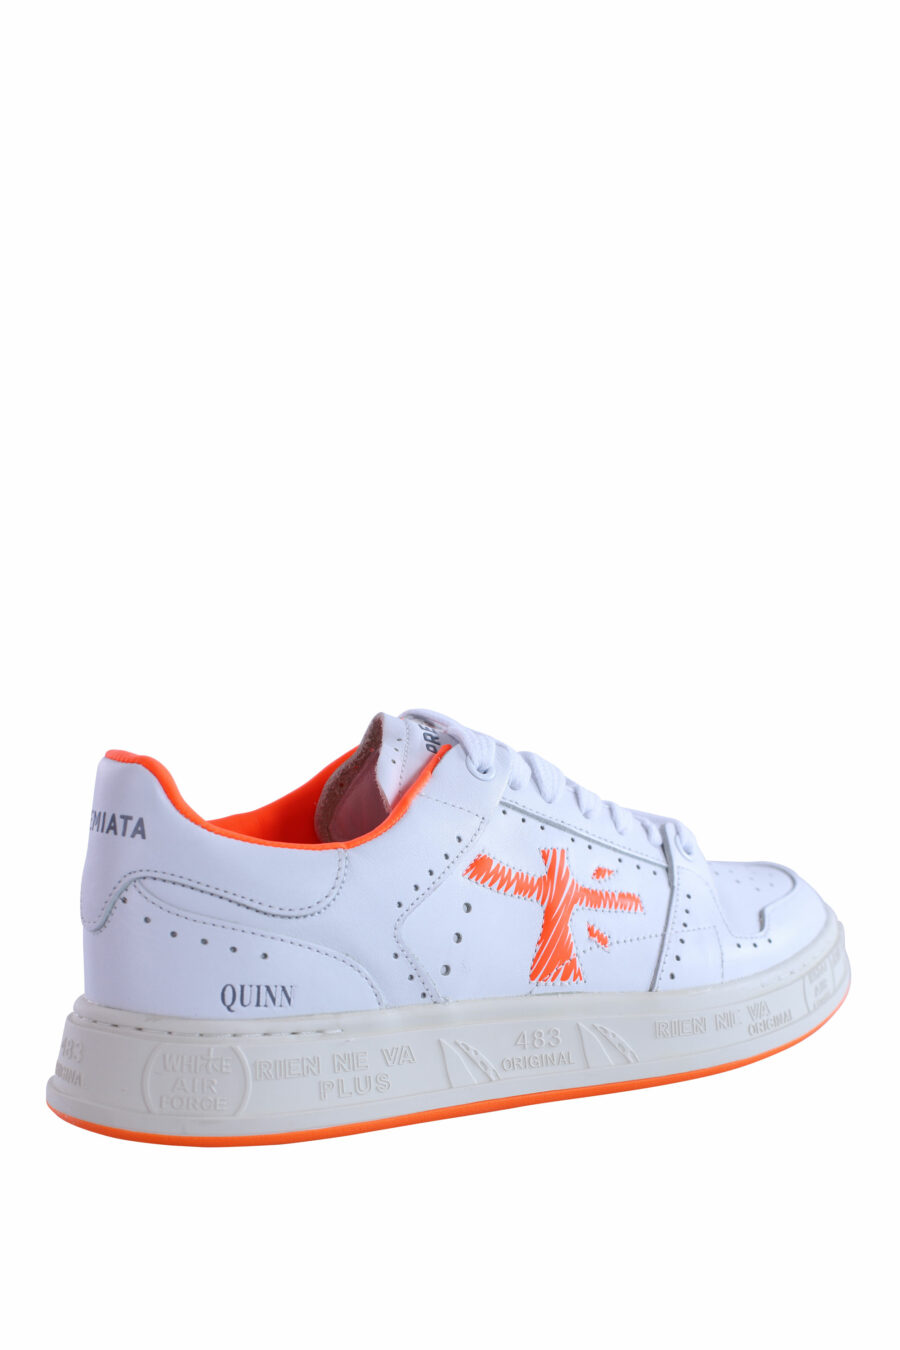 White trainers with orange "quinn 6302" - IMG 2995